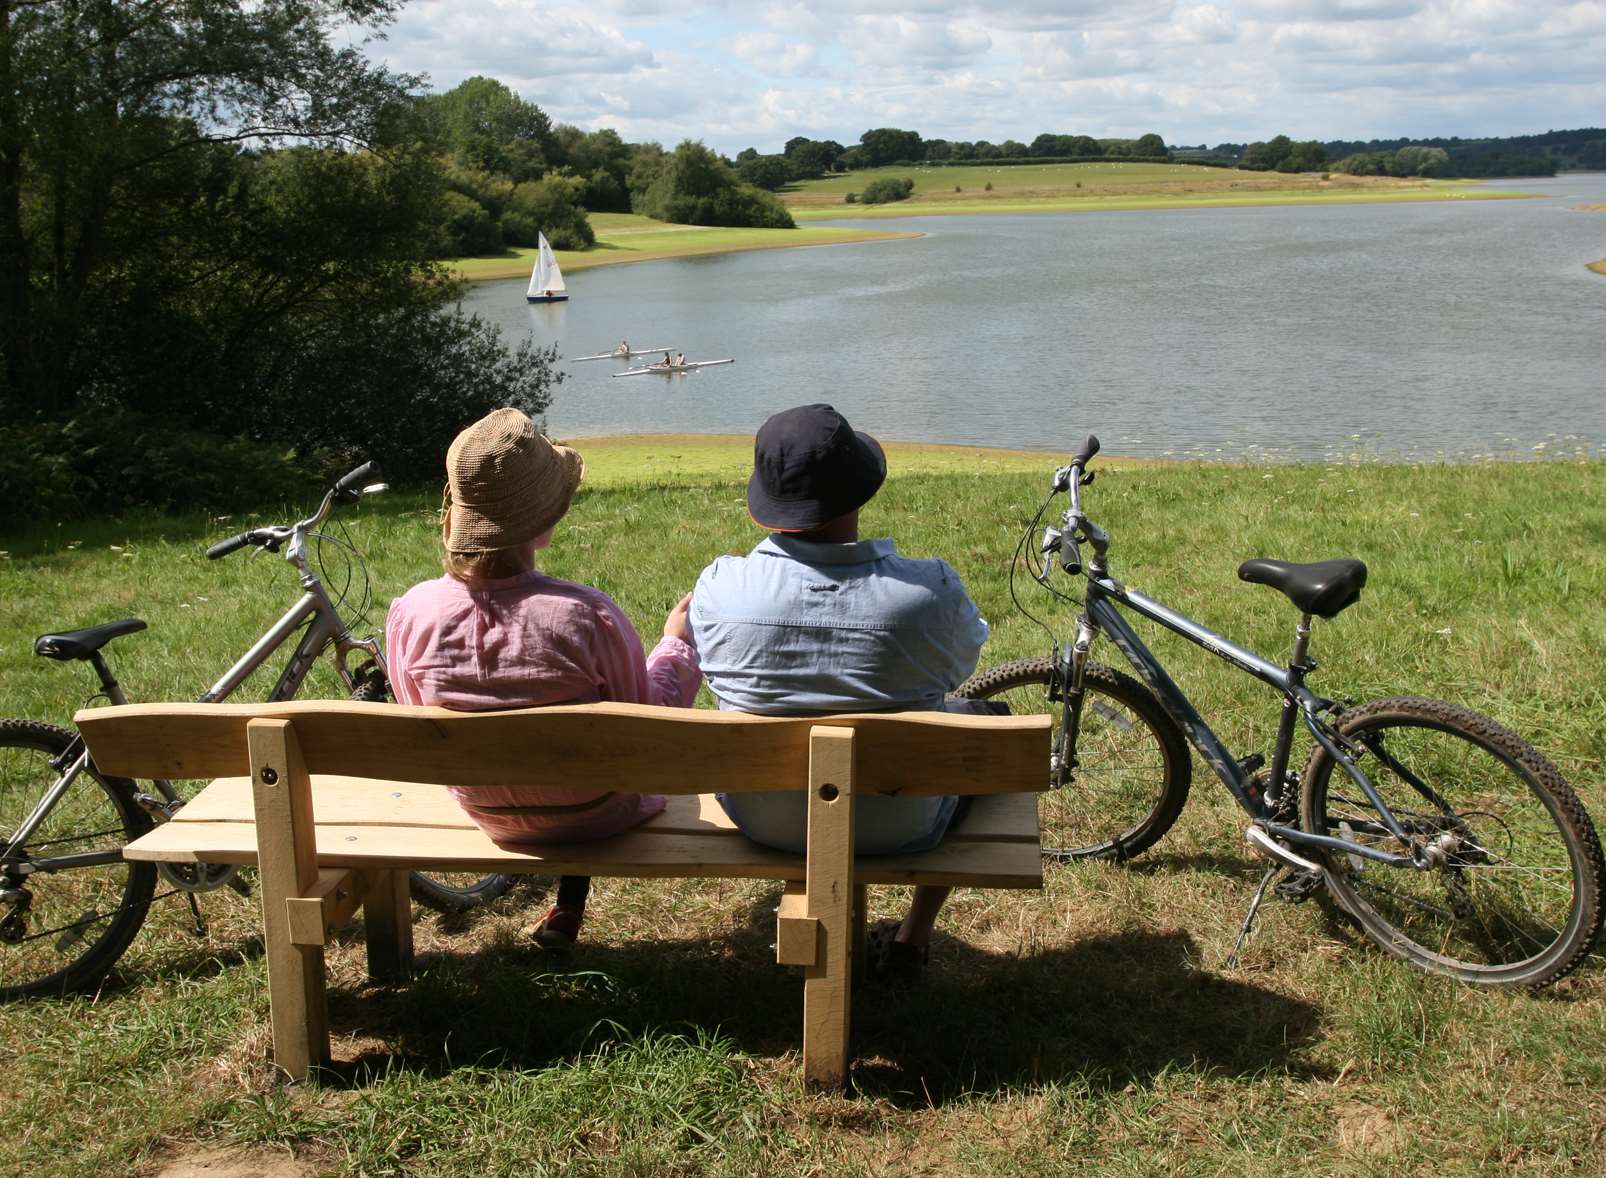 Relax and take in the view after a bike ride at Bewl Water